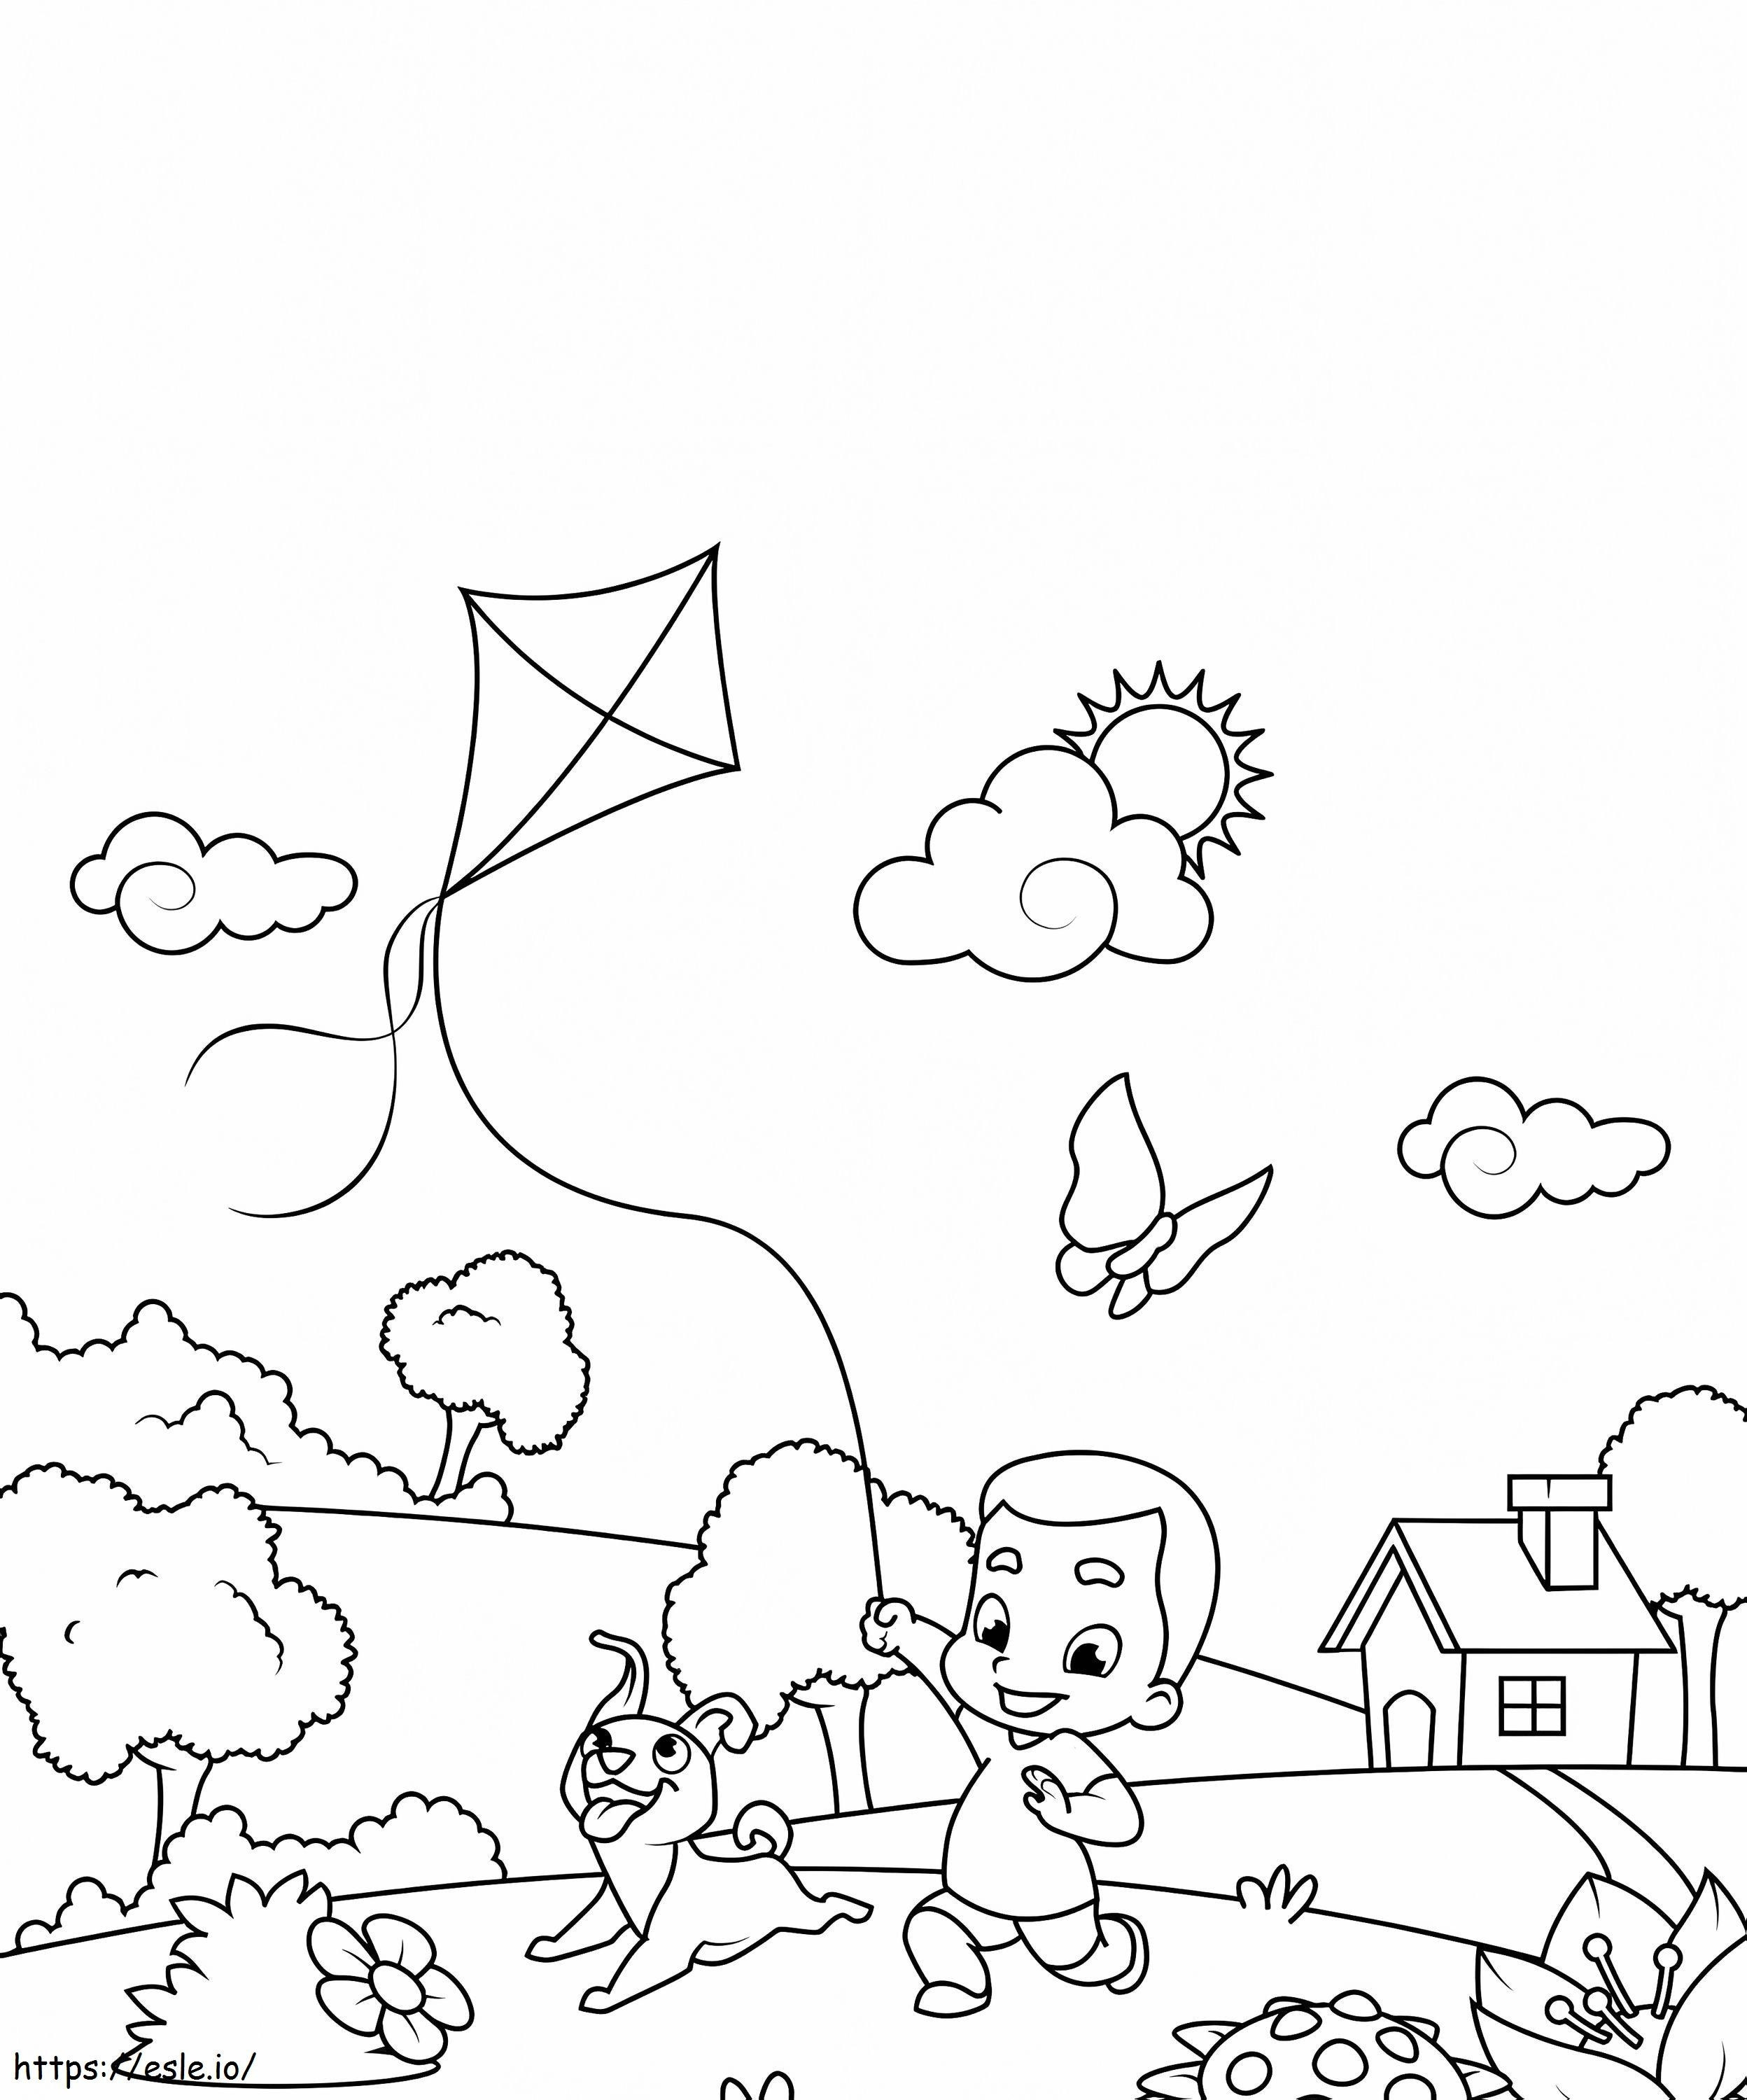 1560411498 Boy Flying A Kite A4 coloring page